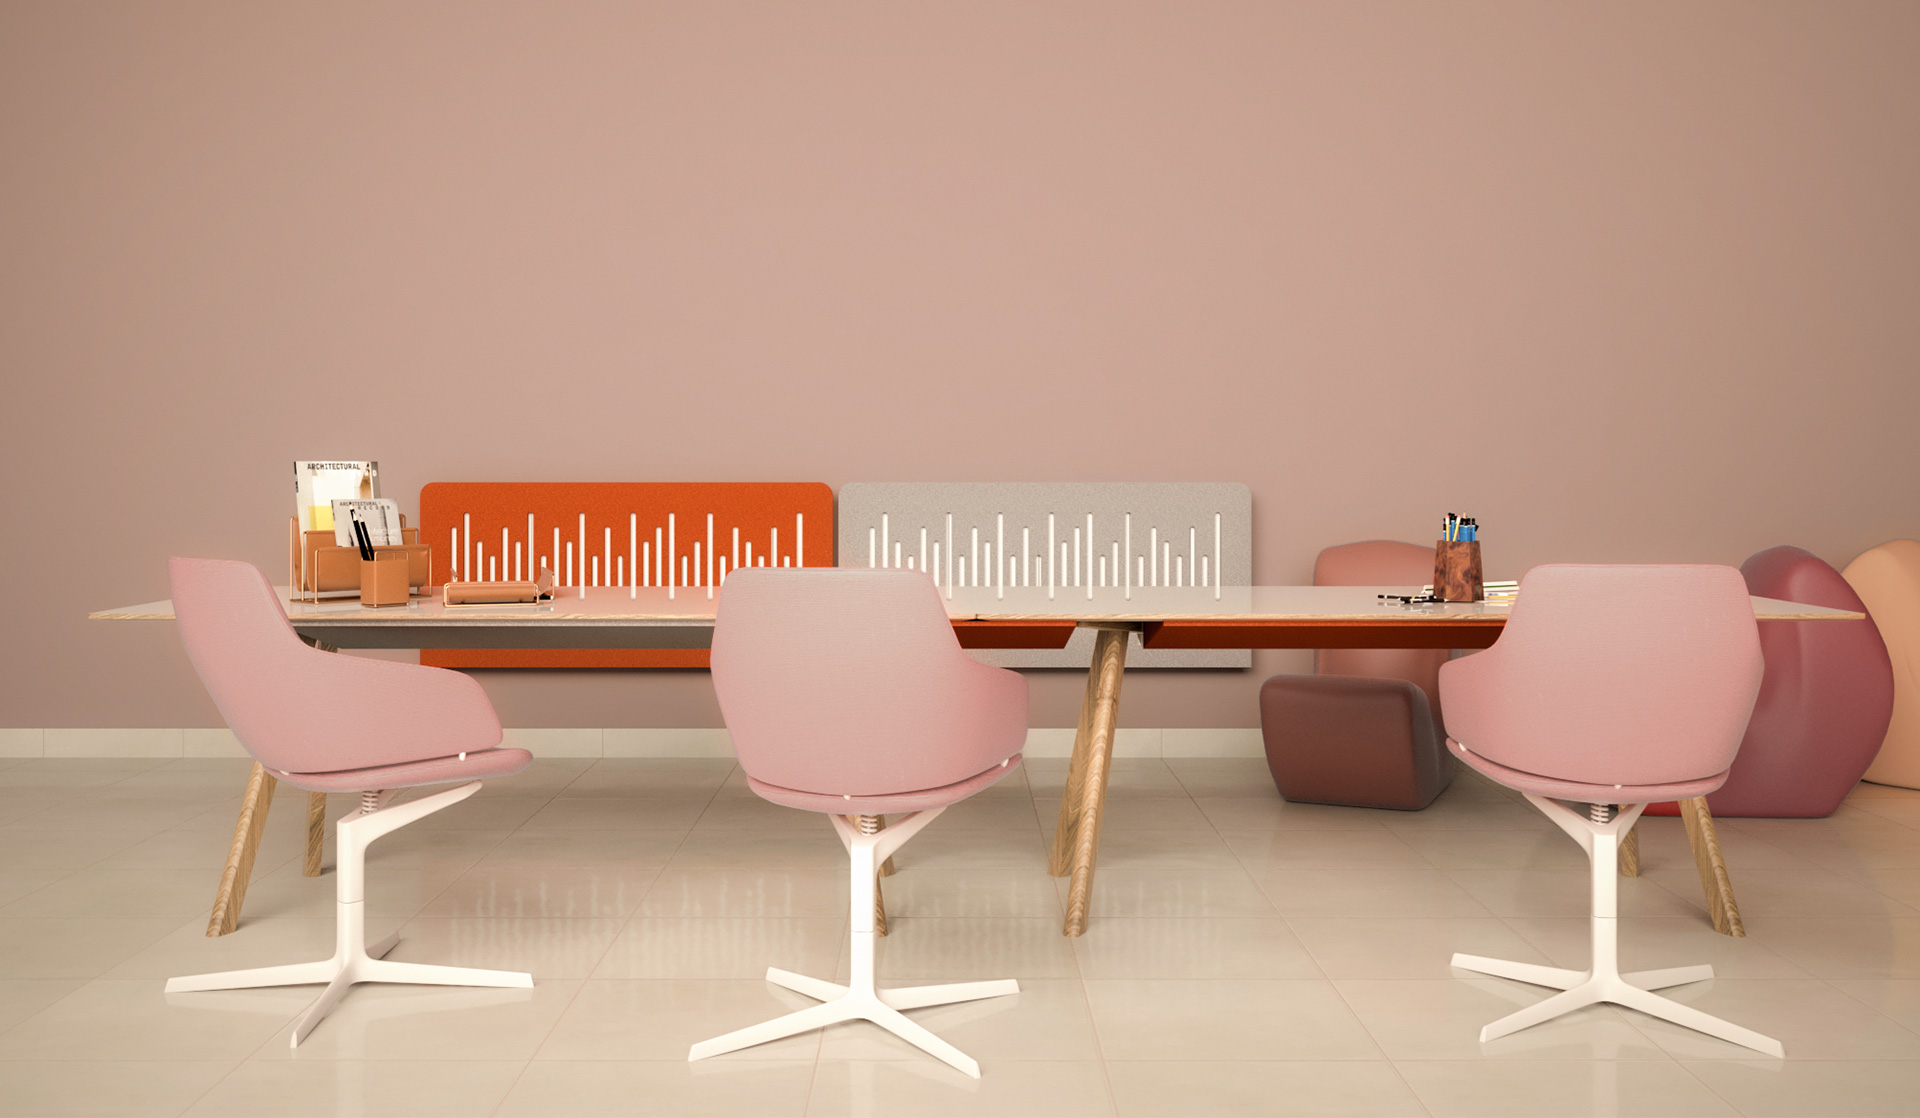 Sound-absorbing colourful decorative radiator covers in office